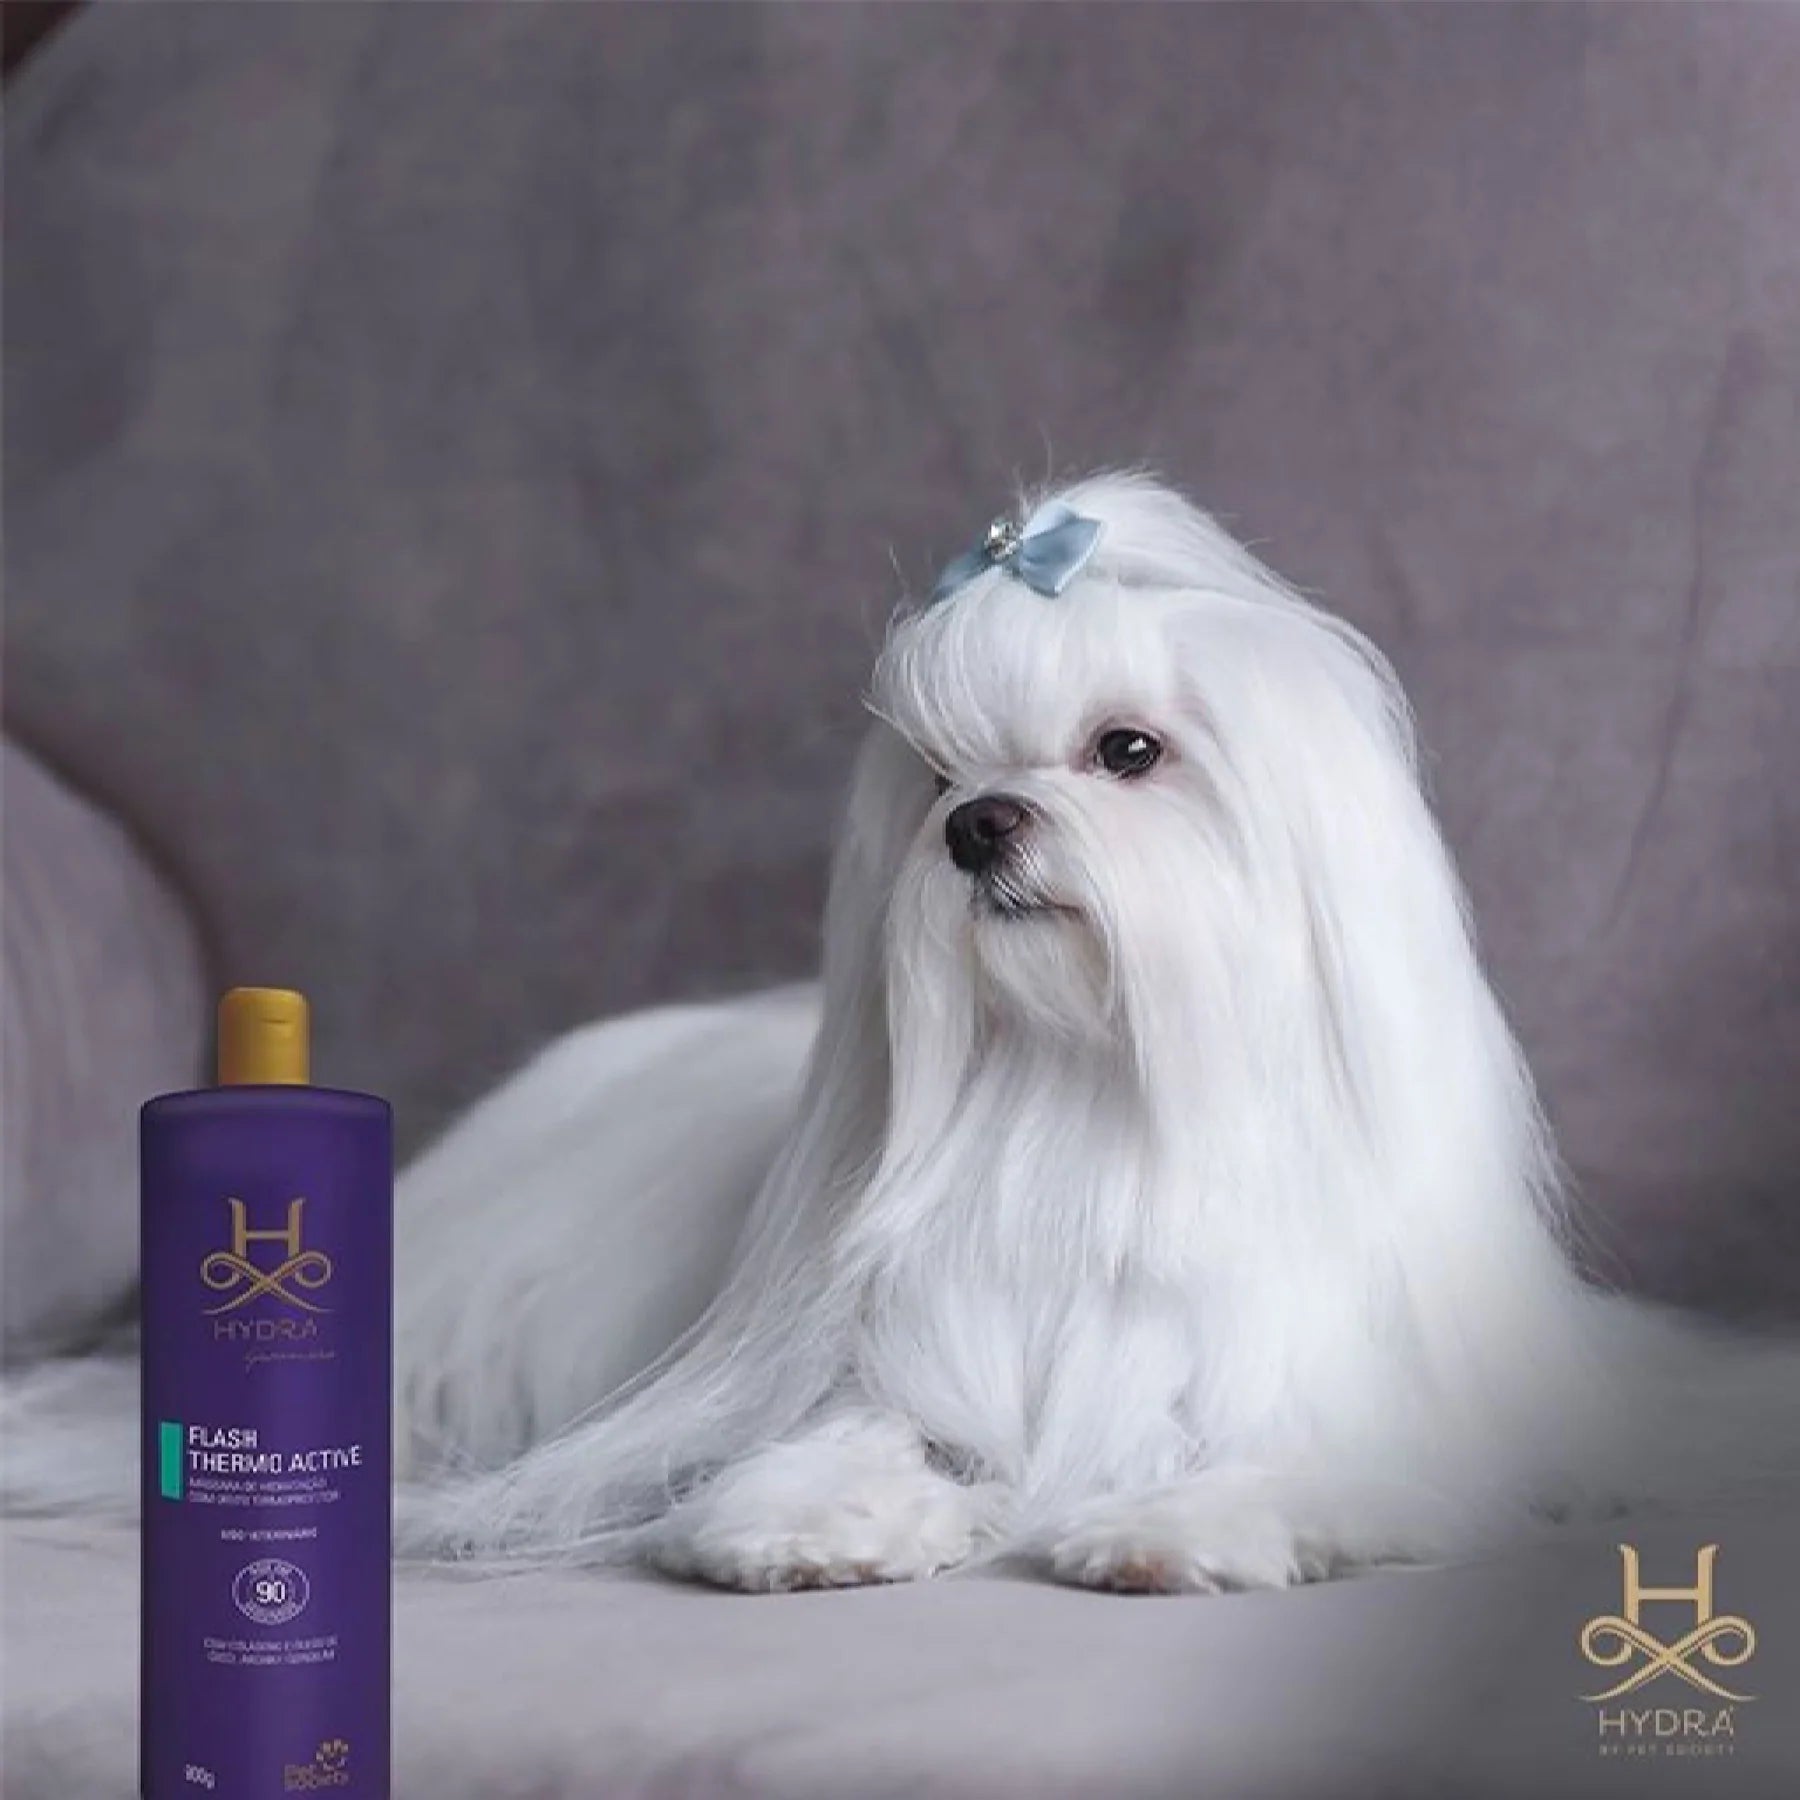 Hydra Professional Flash Active Deep Conditioner for Pets, 900 Ml